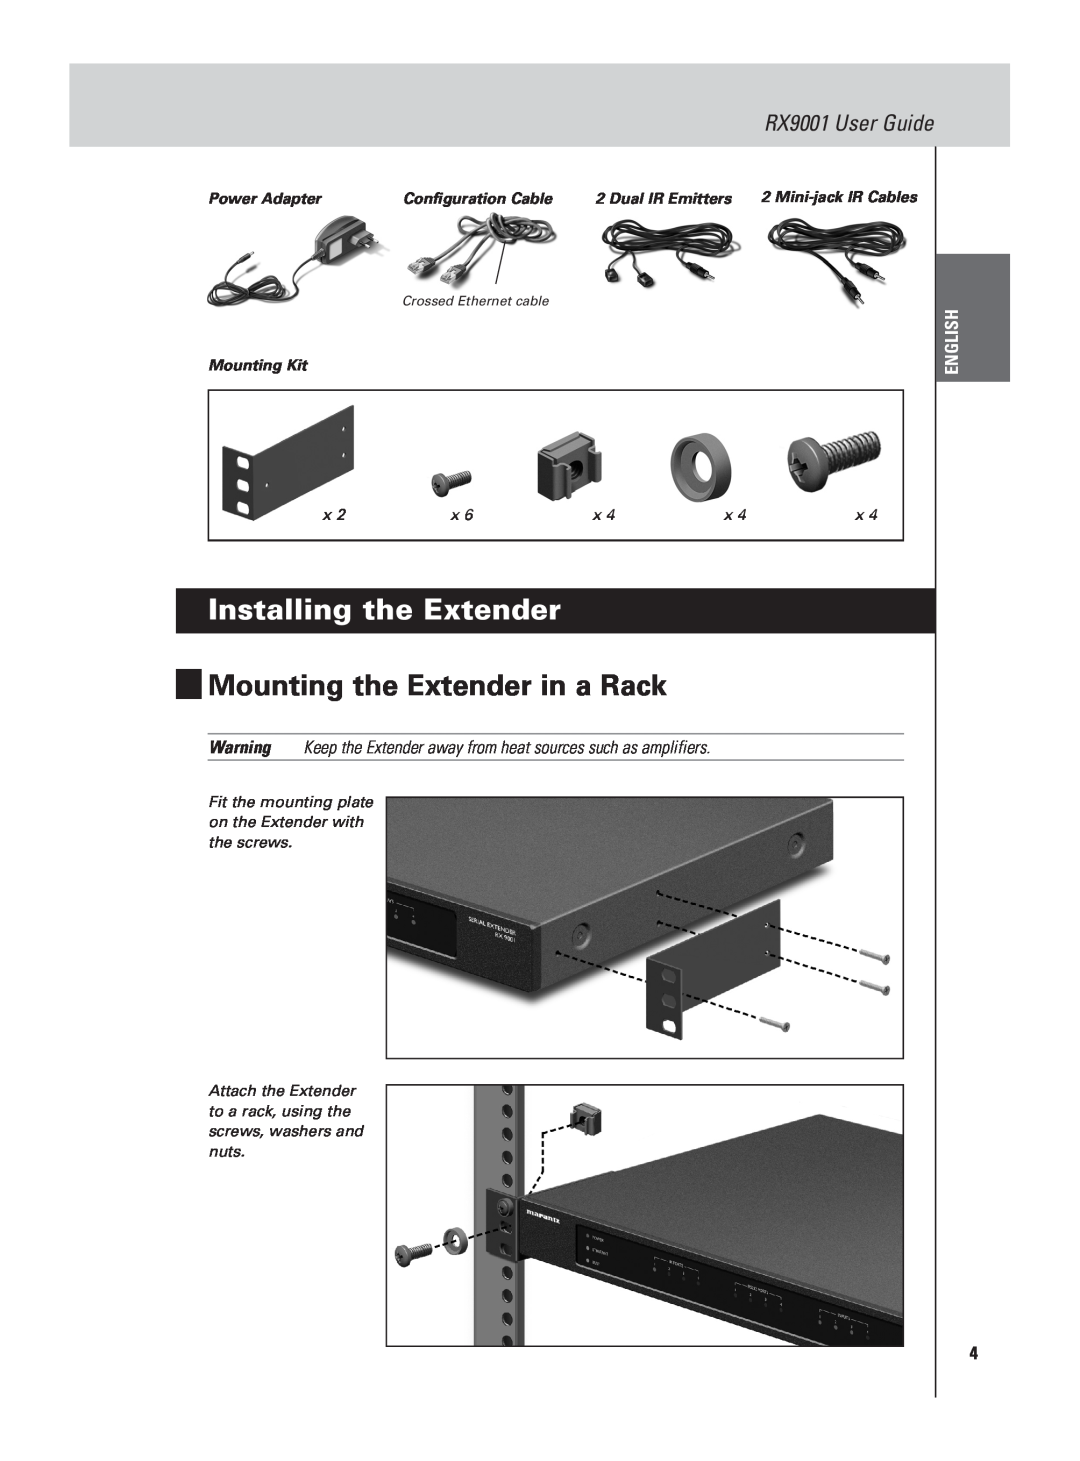 Marantz manual Installing the Extender, Mounting the Extender in a Rack, RX9001 User Guide, English, Power Adapter 